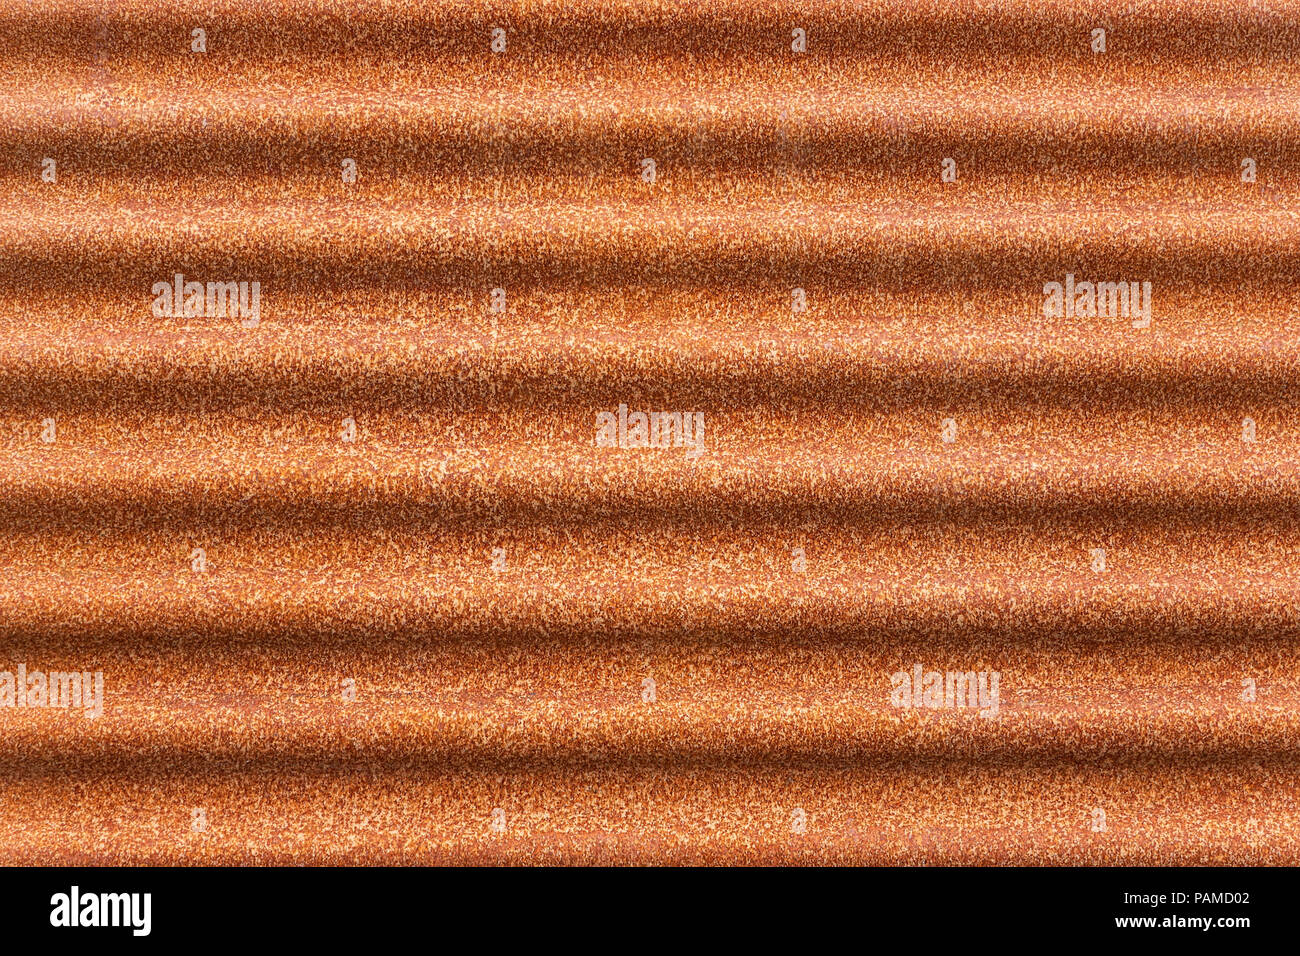 Rusty corrugated iron, rust orange abstract background, natural texture. Stock Photo